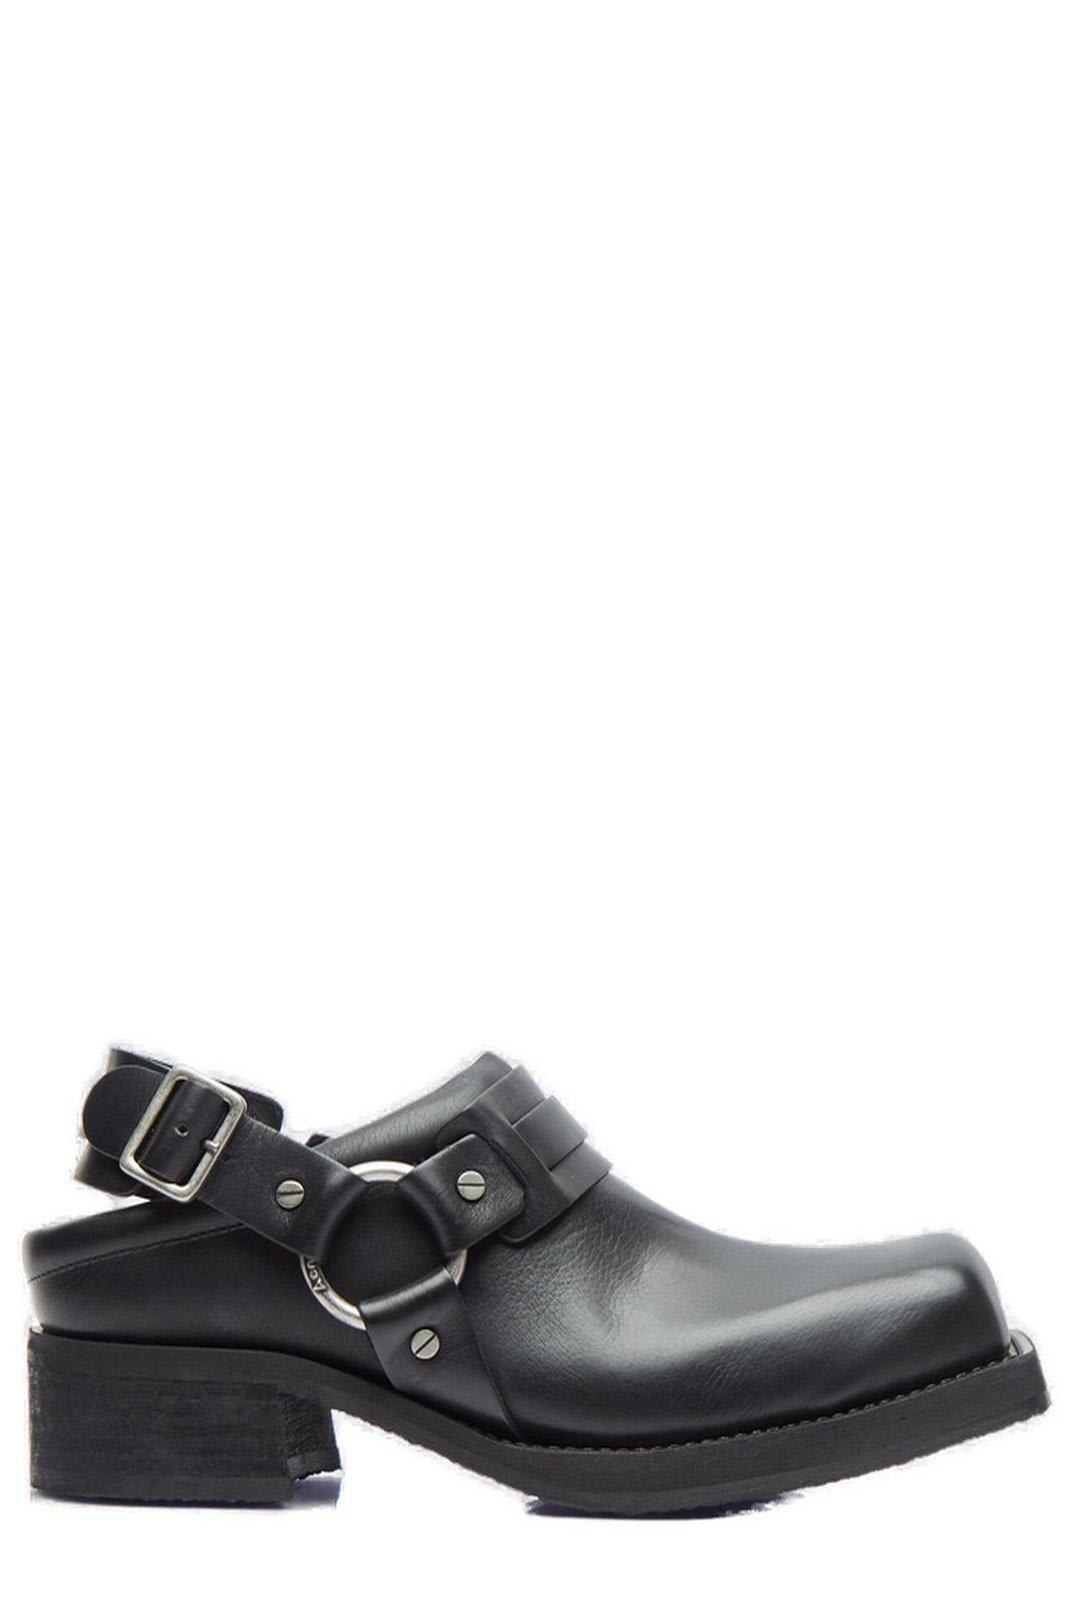 ACNE STUDIOS SQUARE-TOE BUCKLED LOAFERS